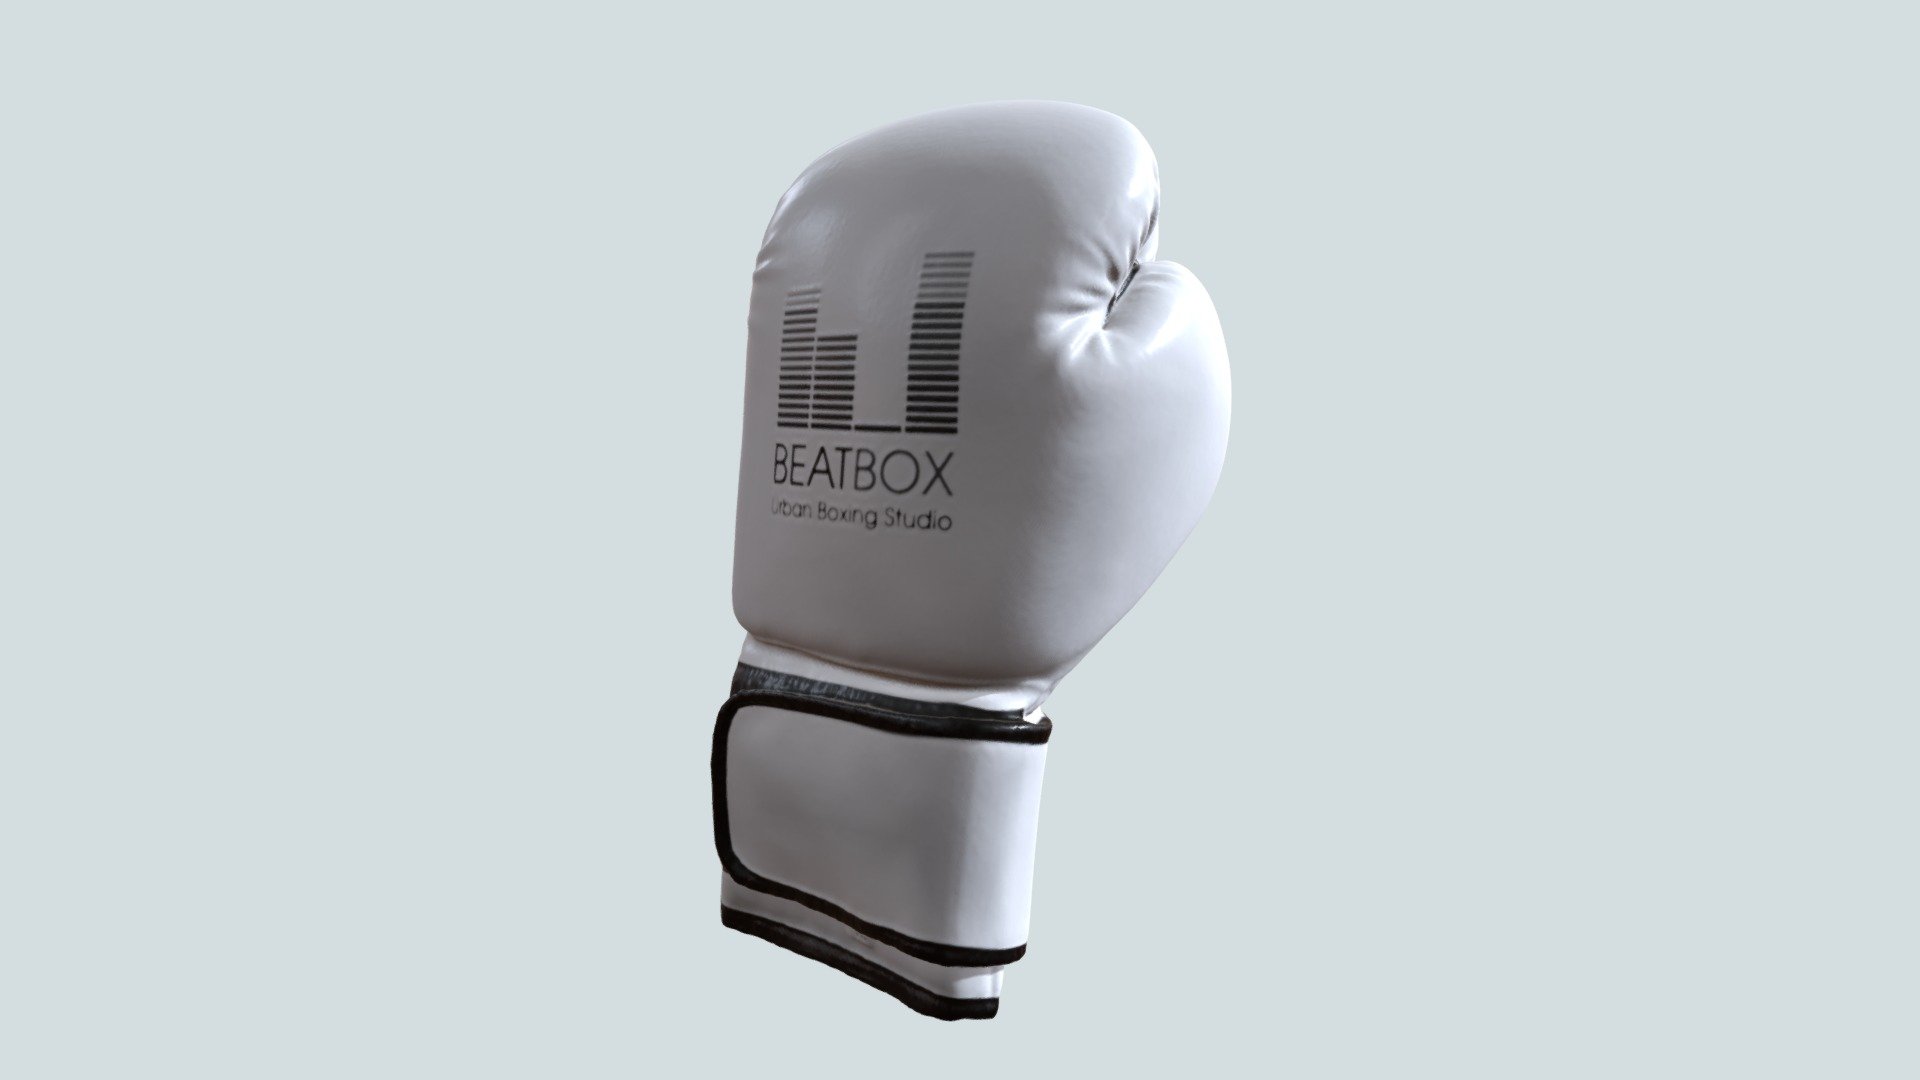 A 3D scan of a boxing glove provided by Beatbox, using the Artec Eva 3D scanner 3d model